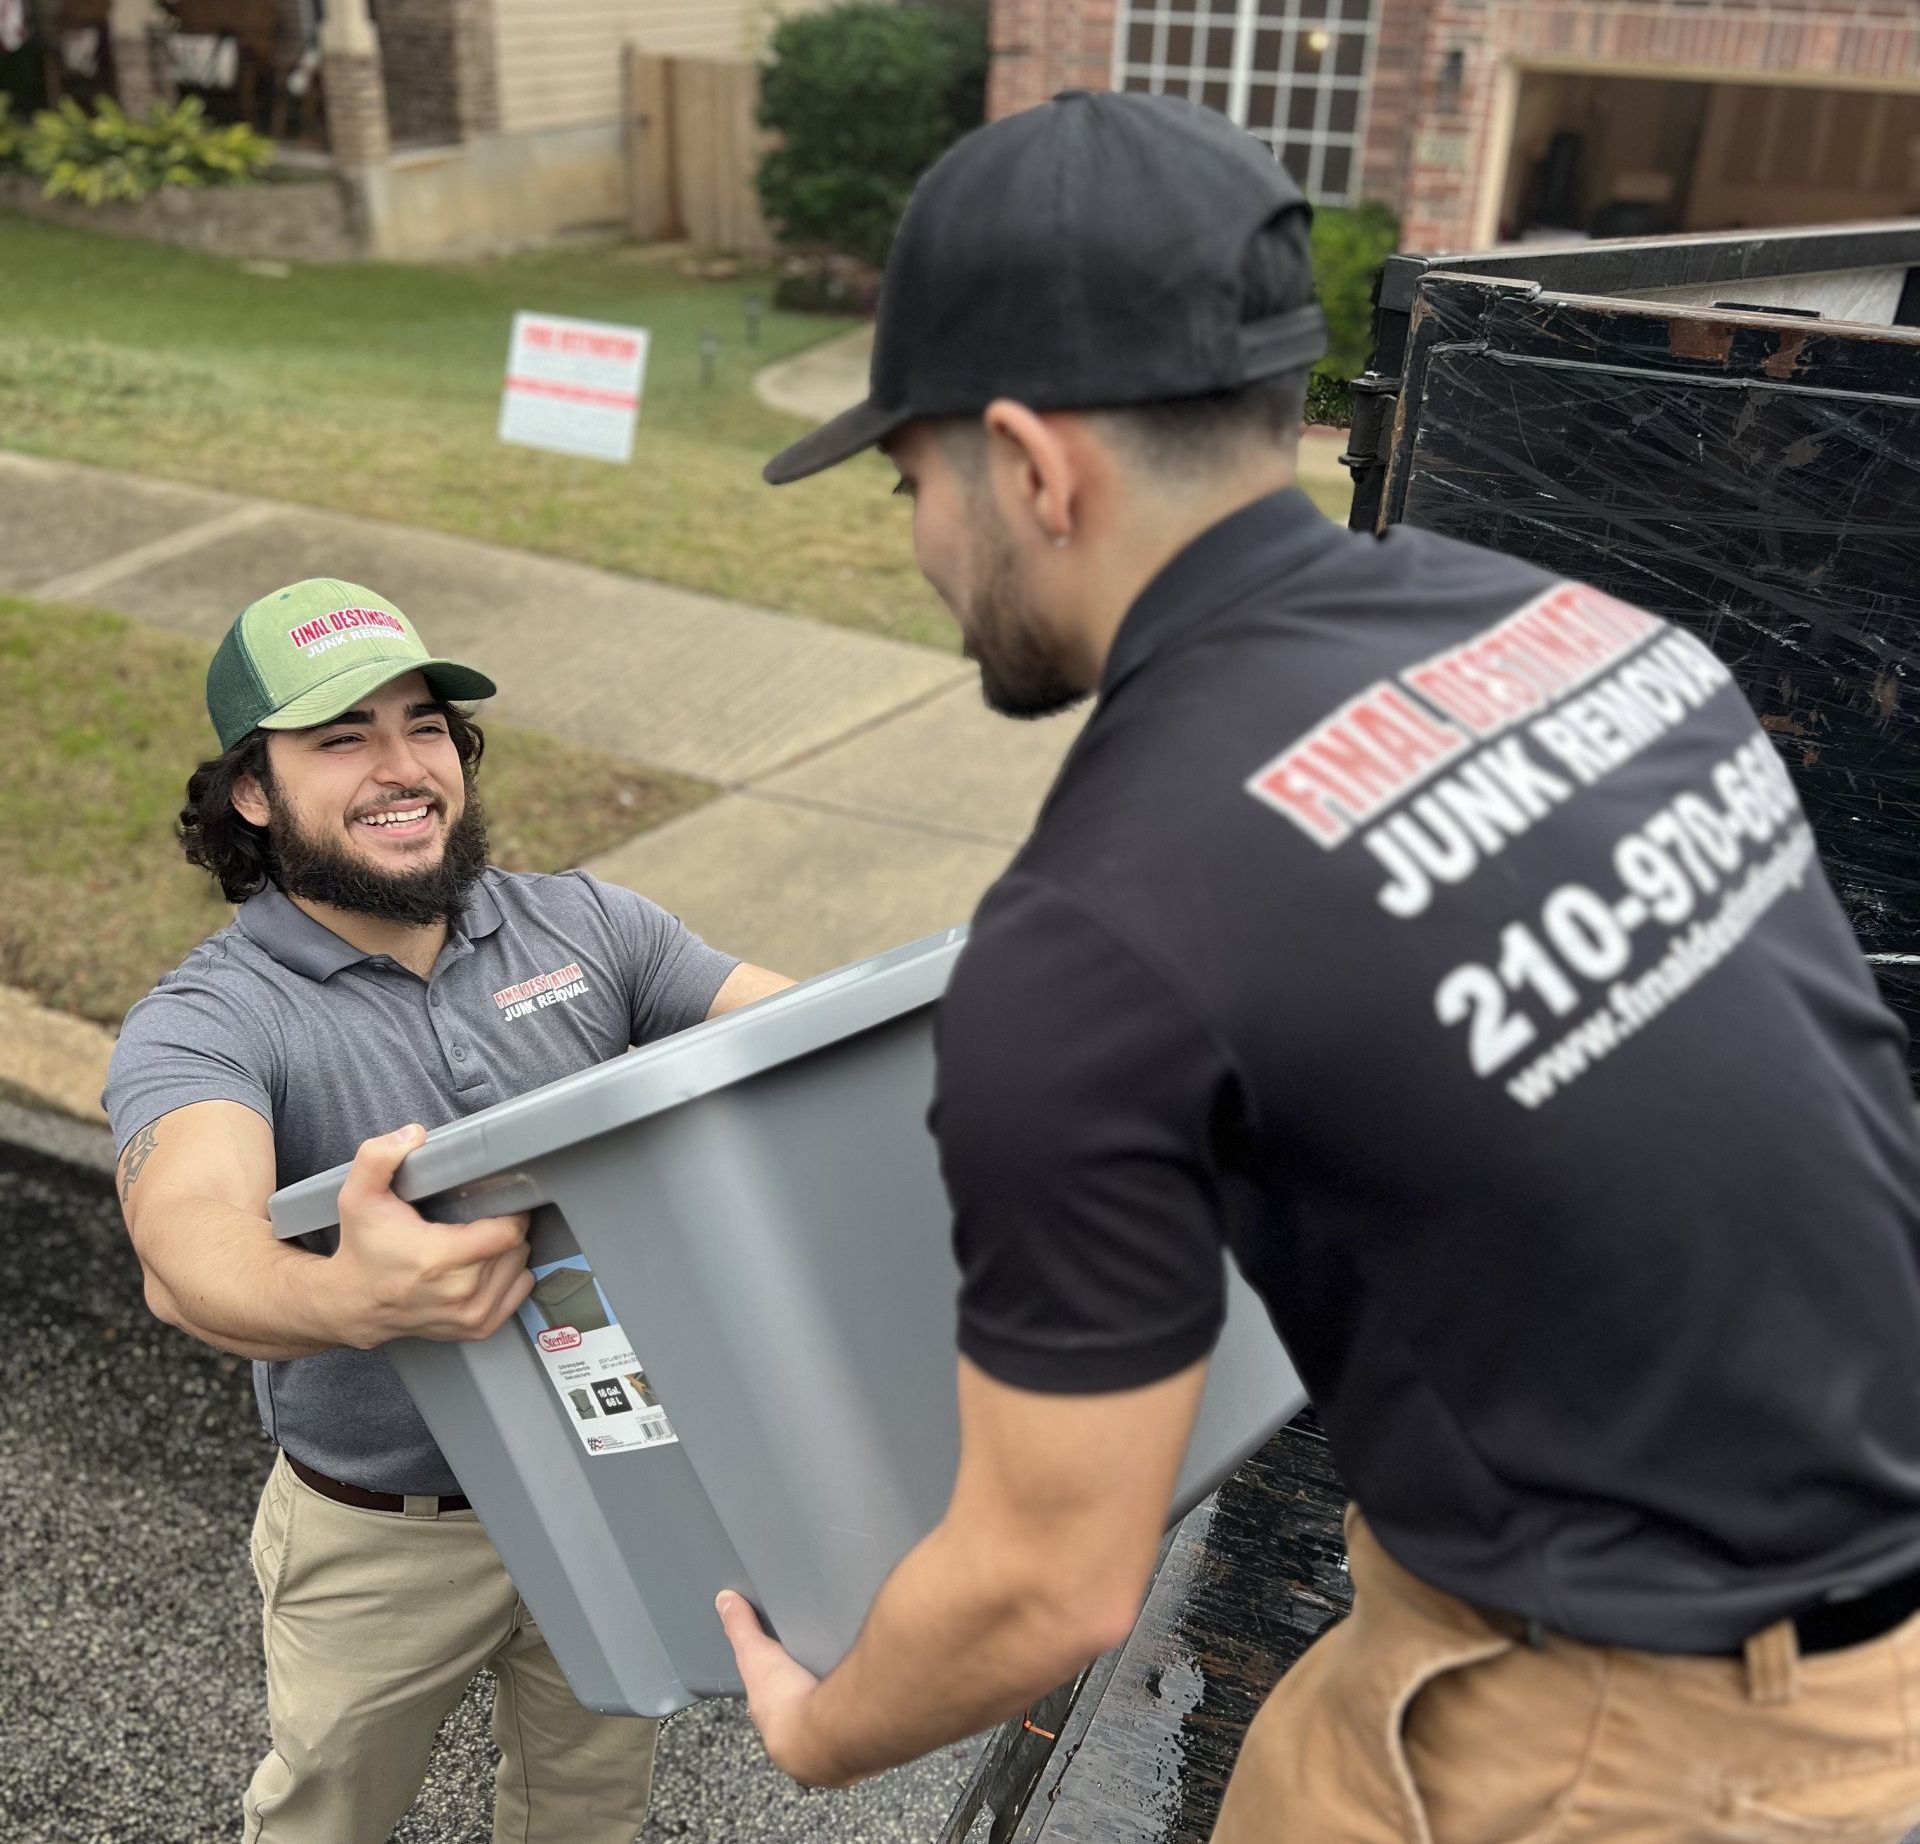 Need to get rid of my junk in Converse, TX? Call Final Destination, your local team of experts that specialize in hauling away junk. We take away junk to get donated, recycled, or disposal. We provide free junk pickup estimate for the local residents and business owners in Converse, Texas